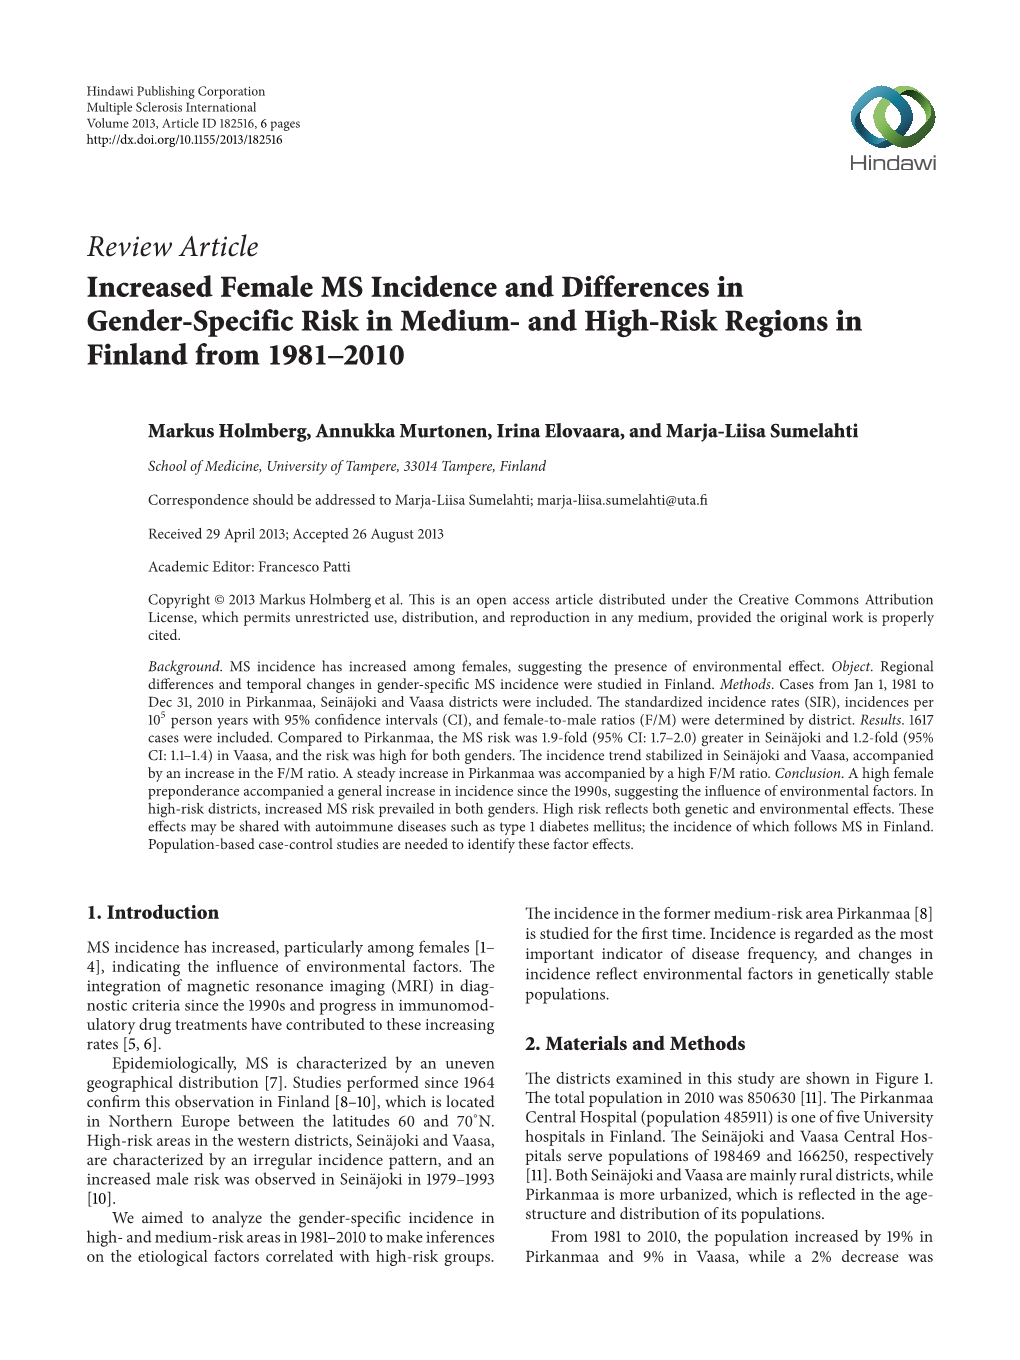 Increased Female MS Incidence and Differences in Gender-Specific Risk in Medium- and High-Risk Regions in Finland from 1981–2010